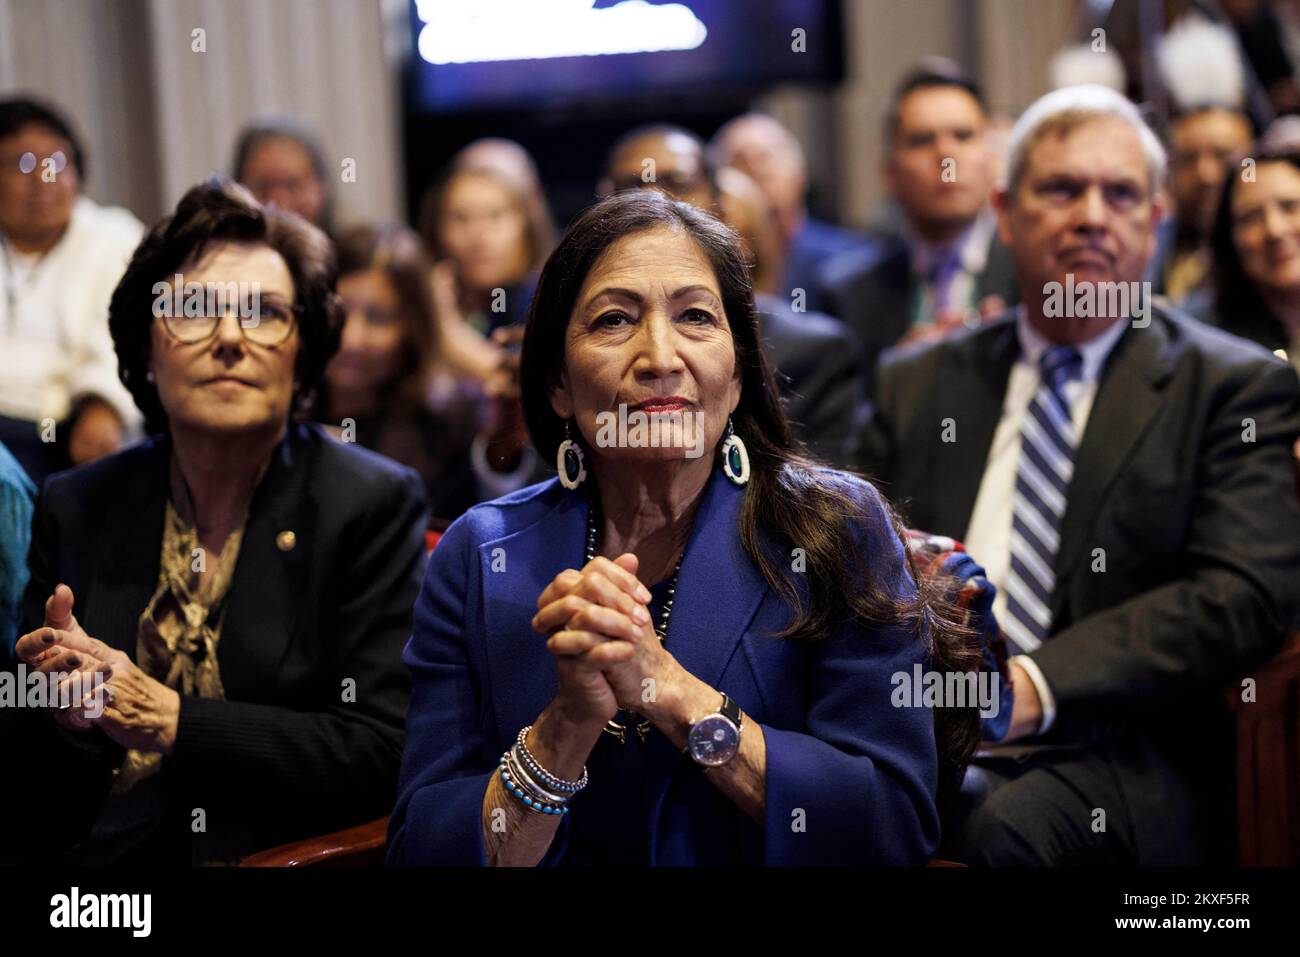 US Secretary of the Interior Deb Haaland, Senator Jacky Rosen, a Democrat from Nevada, in the audience during the White House Tribal Nations Summit at the Department of the Interior in Washington, DC, US, on Wednesday, Nov. 30, 2022. The first in-person Tribal Nations Summit of the Biden administration is allowing federal officials and Tribal leaders to engage about ways to invest in and strengthen Native communities, according to the White House. Photo by Ting Shen/Pool/ABACAPRESS.COM Stock Photo